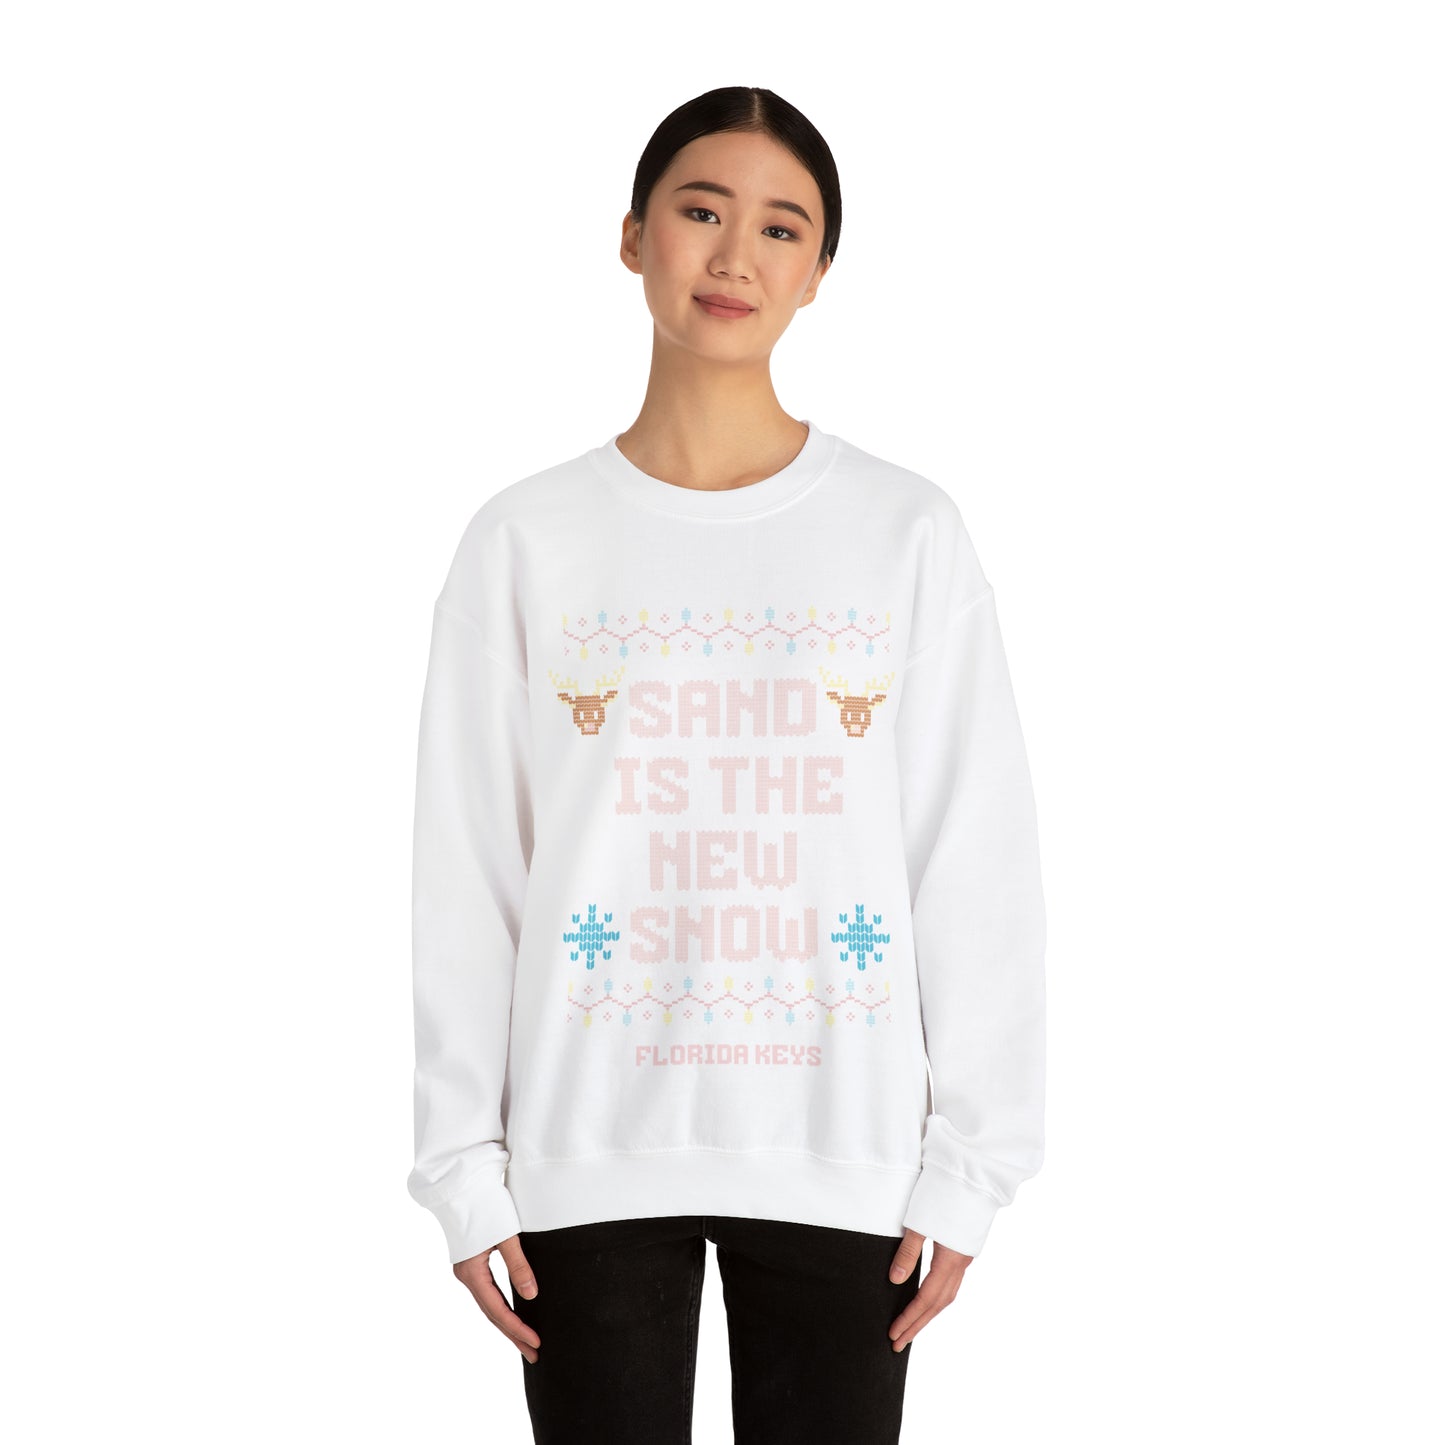 Sand is the new Snow - Sweatshirt for the Florida Keys  - Florida sweatshirt - beach sweatshirt